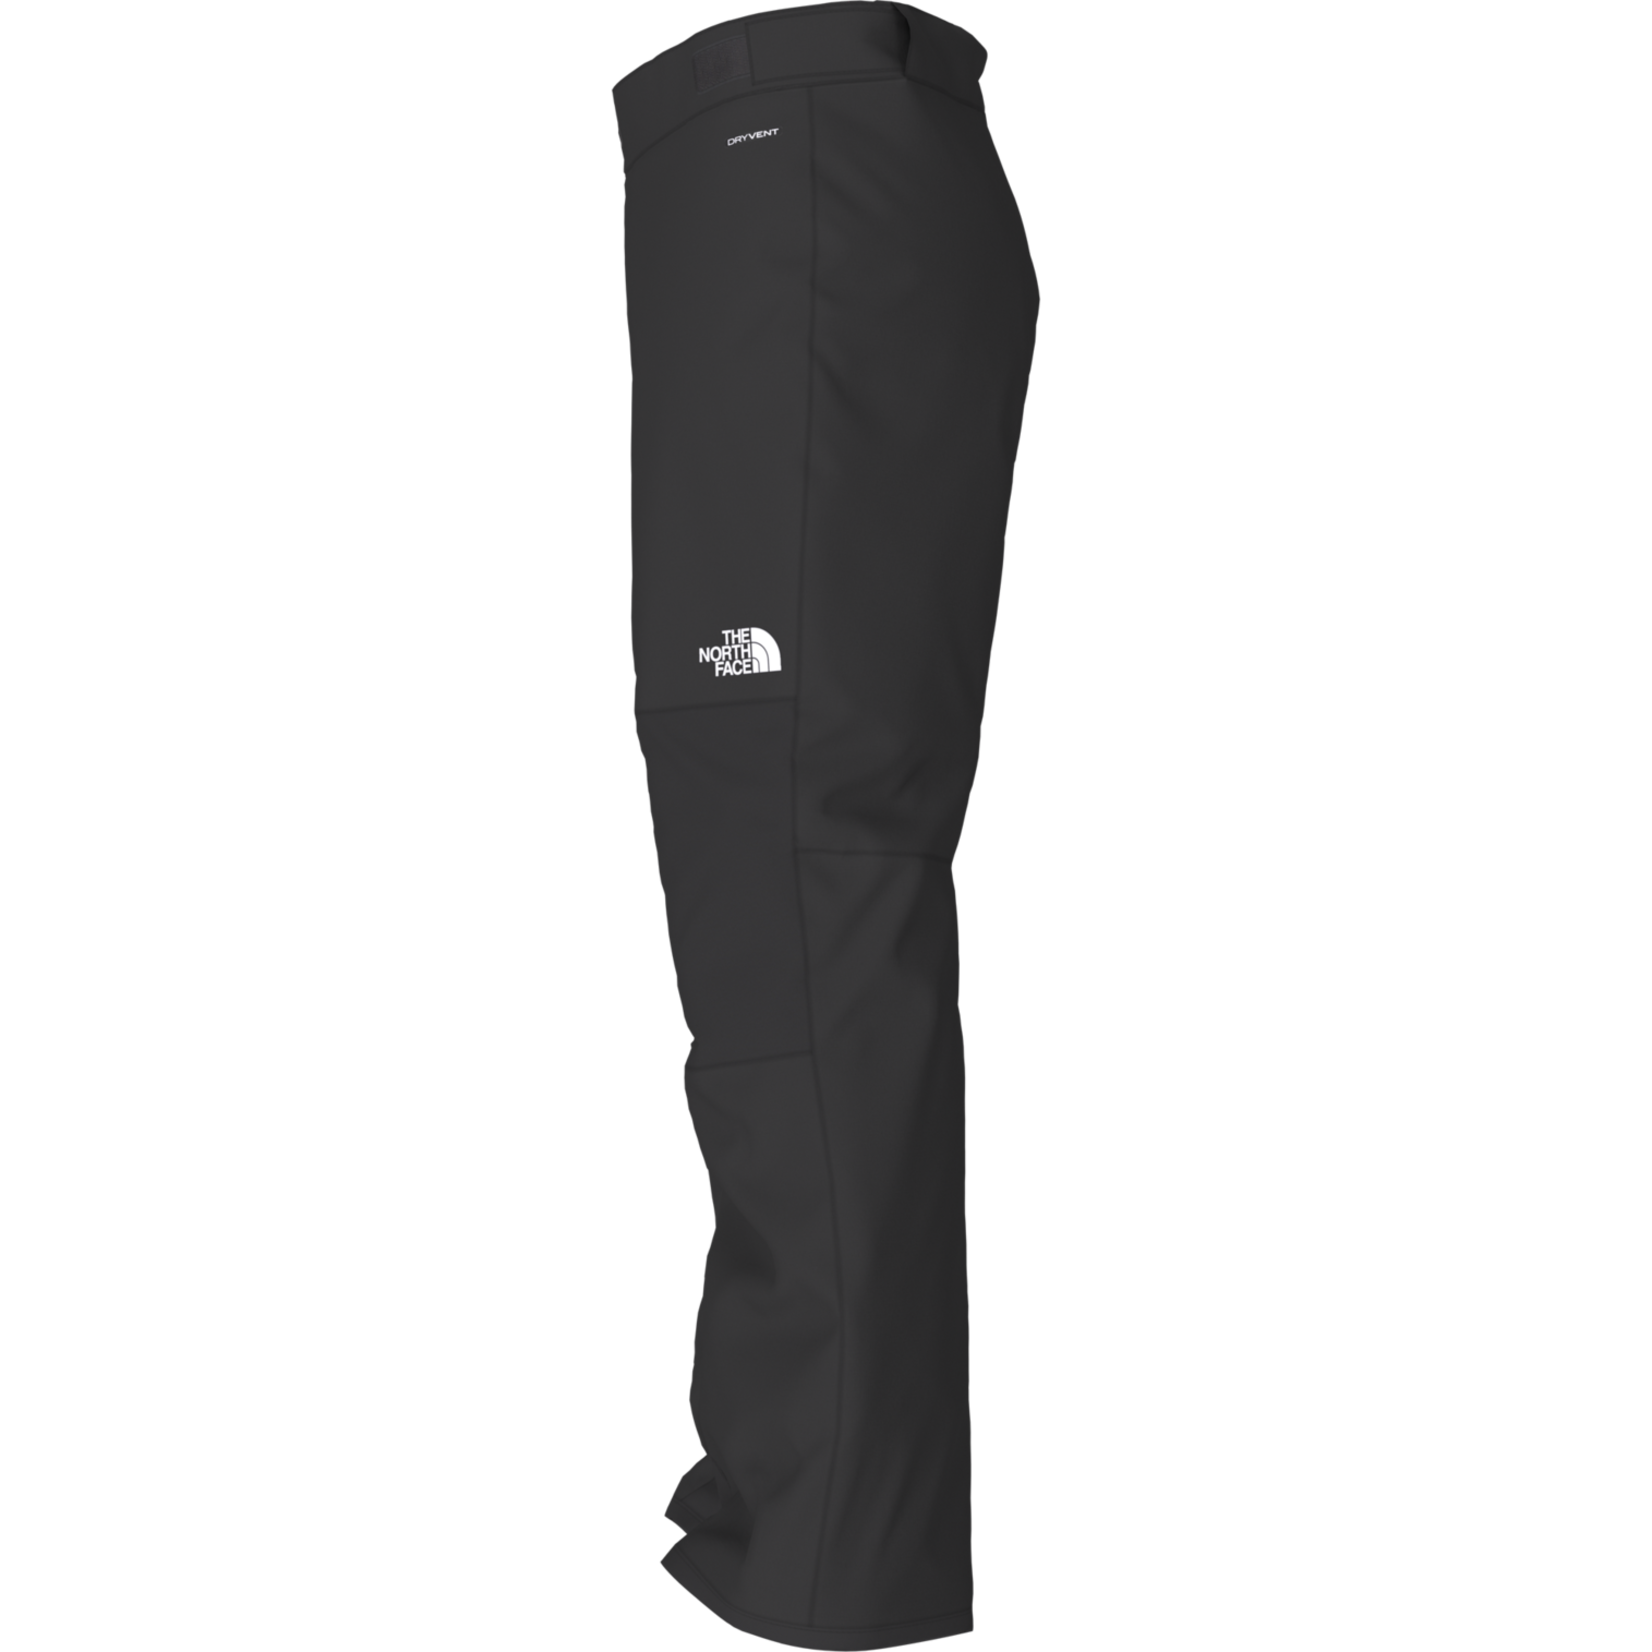 THE NORTH FACE Boys' Freedom Insulated Pant, TNF Black, Large